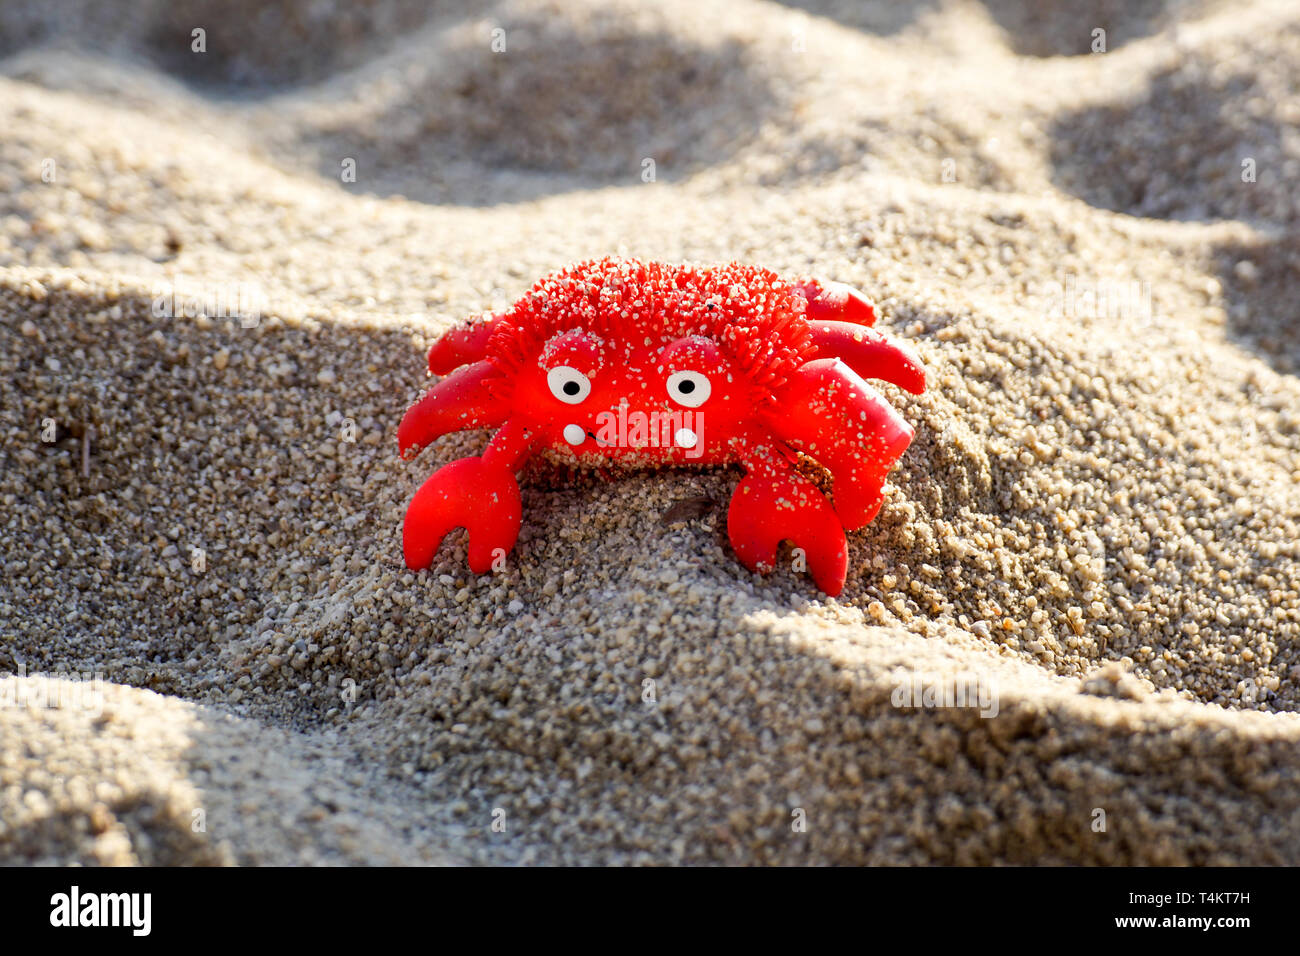 Colourful red crab toy on a beach Stock Photo